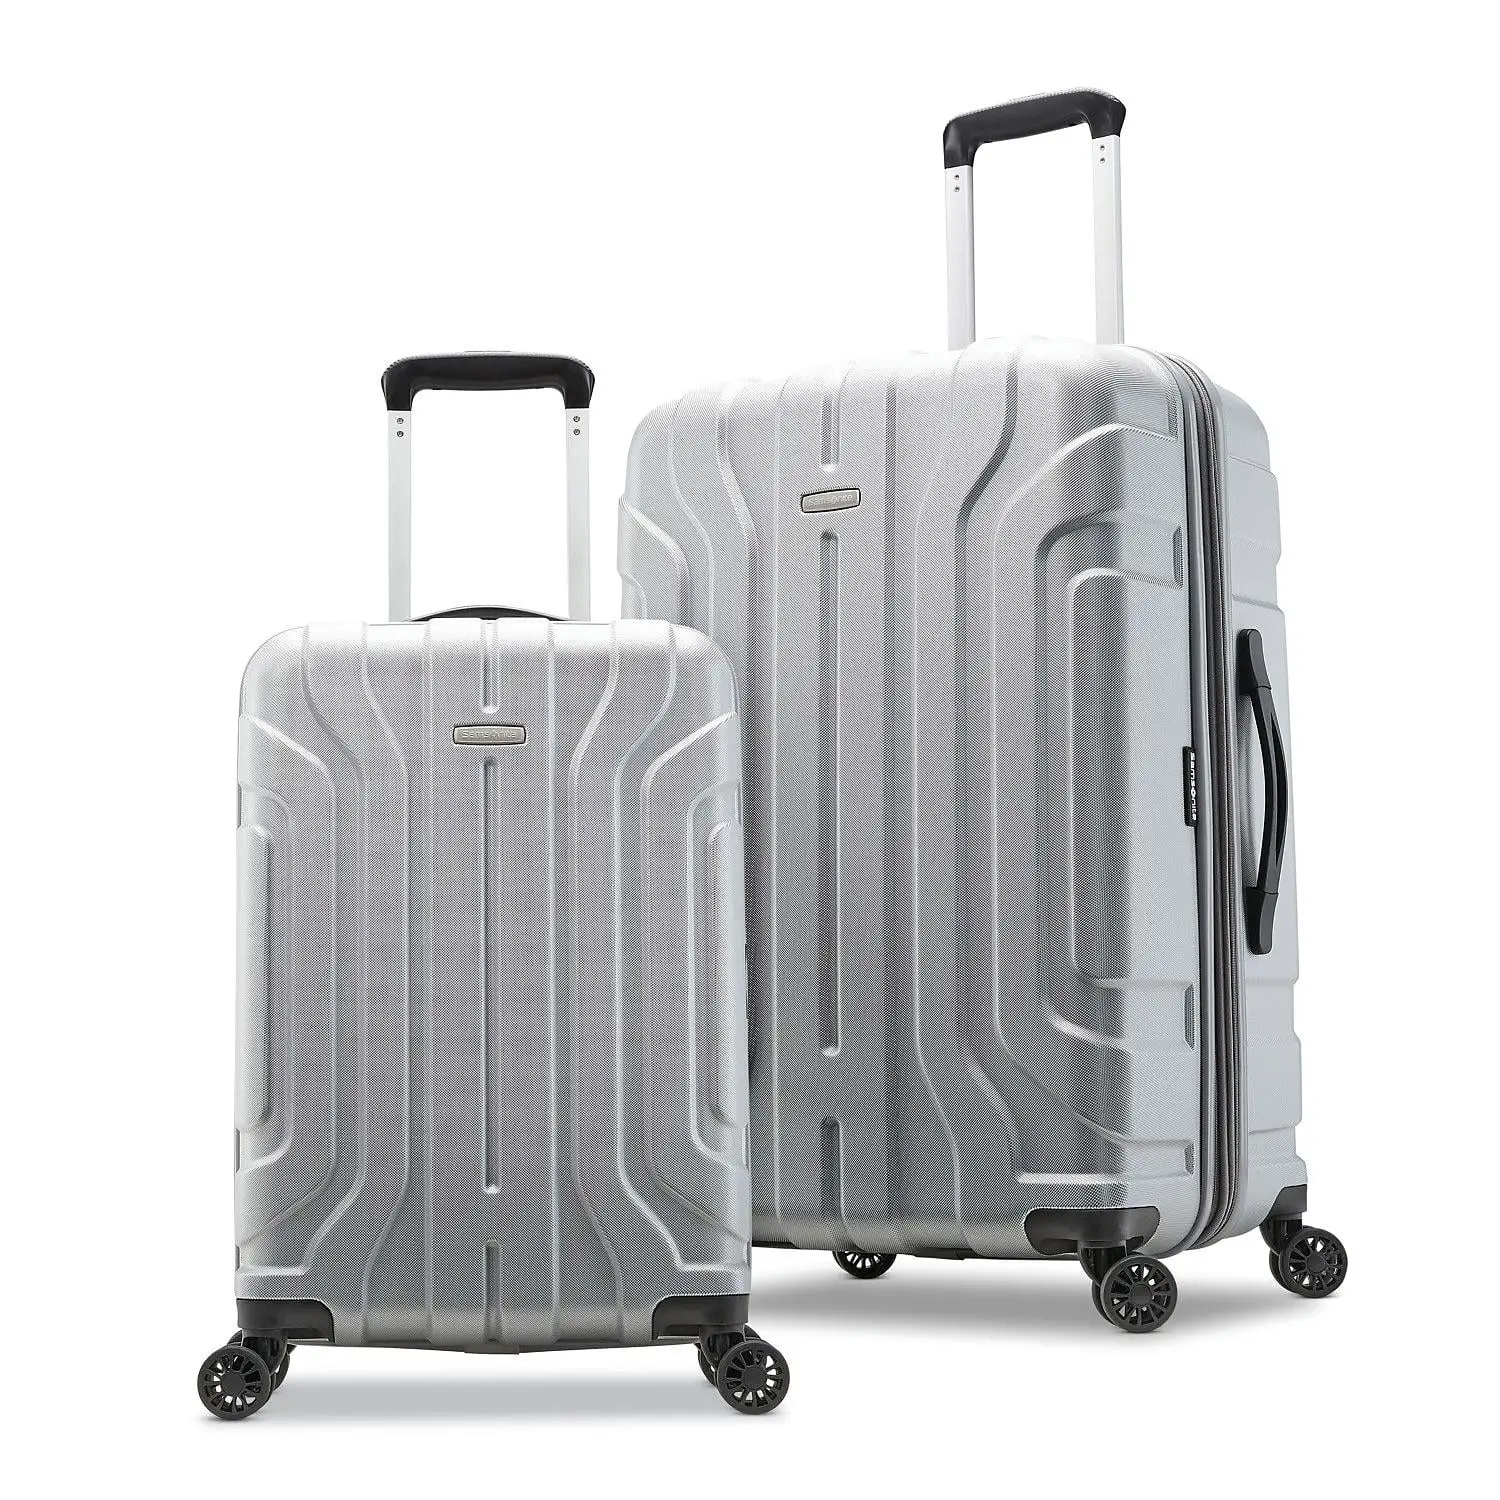 Will a 20″ Samsonite Fit in United Airlines Overhead Bins?